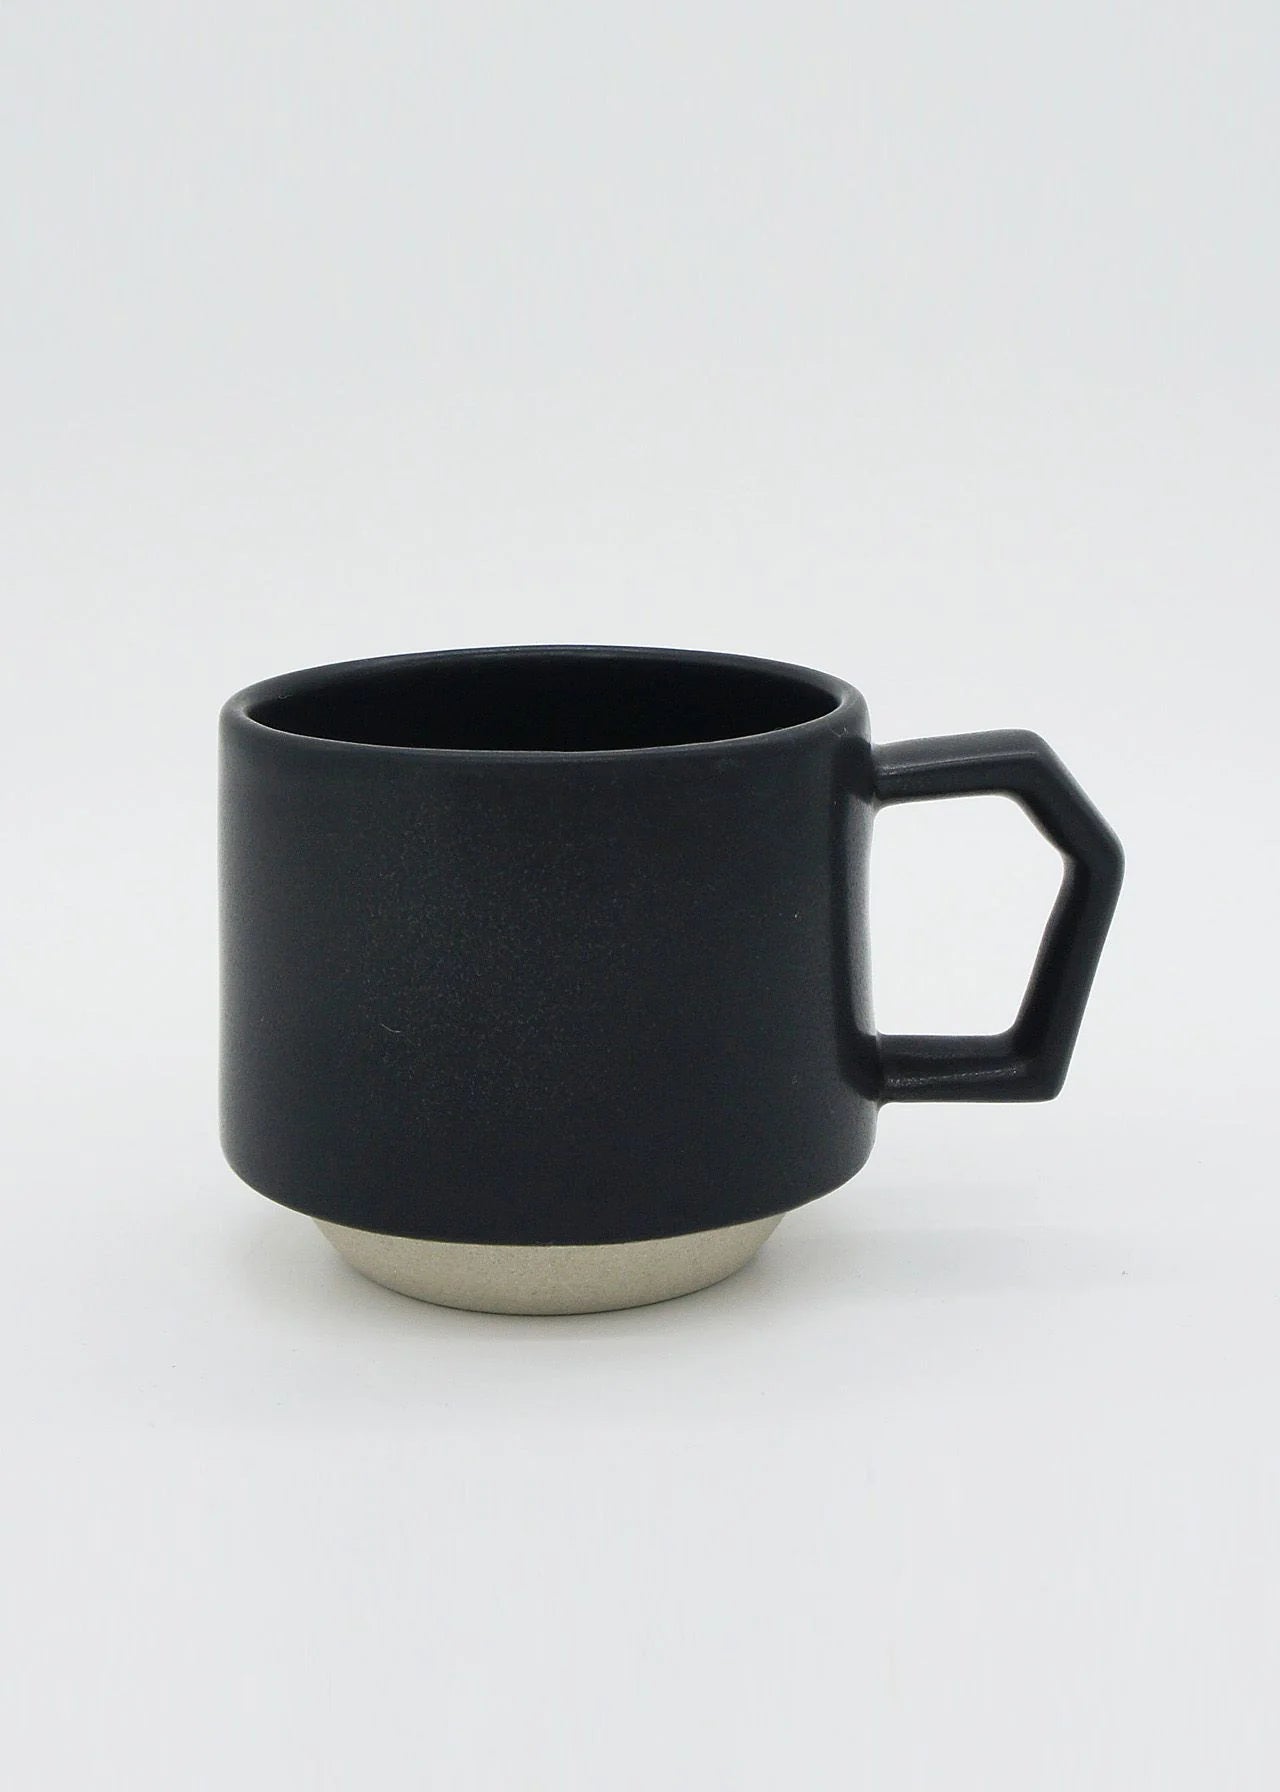 A stacking mug - black with a handle from CHIPS Inc.